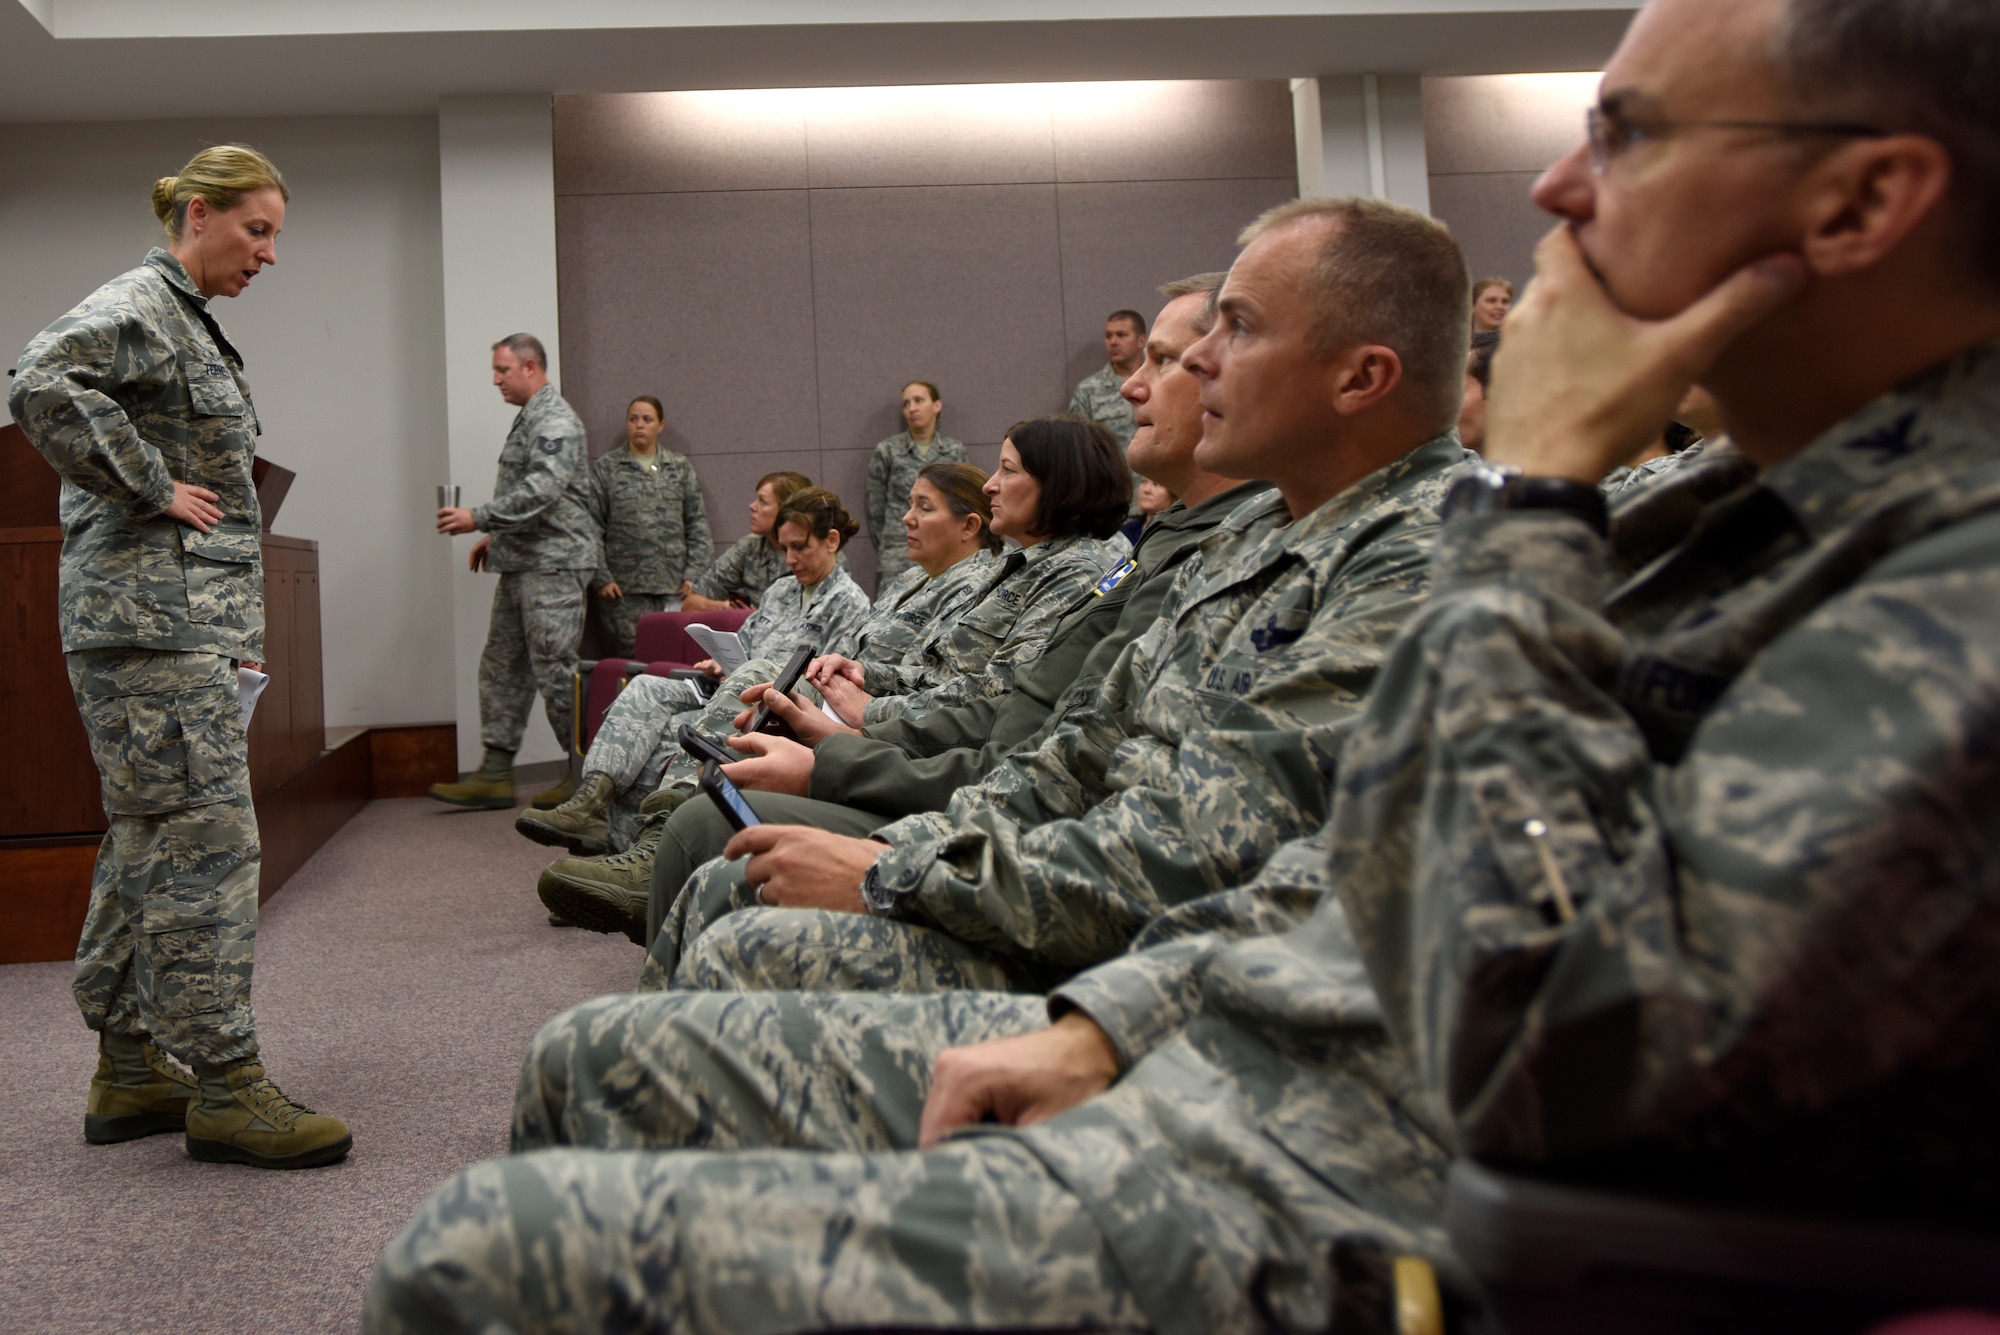 U.S. Air Force Col. Bryony Terrell, commander 145th Airlift Wing, delivers a brief during a meeting held at the North Carolina Air National Guard (NCANG) Base, Charlotte Douglas International Airport, Sept. 14, 2018. Airmen across the base prepare for power outages that may occur as a result of Hurricane Florence. Col. Terrell and other individuals from the NCANG brief on safety, weather updates, and forecasted strategies in the wake of Hurricane Florence.